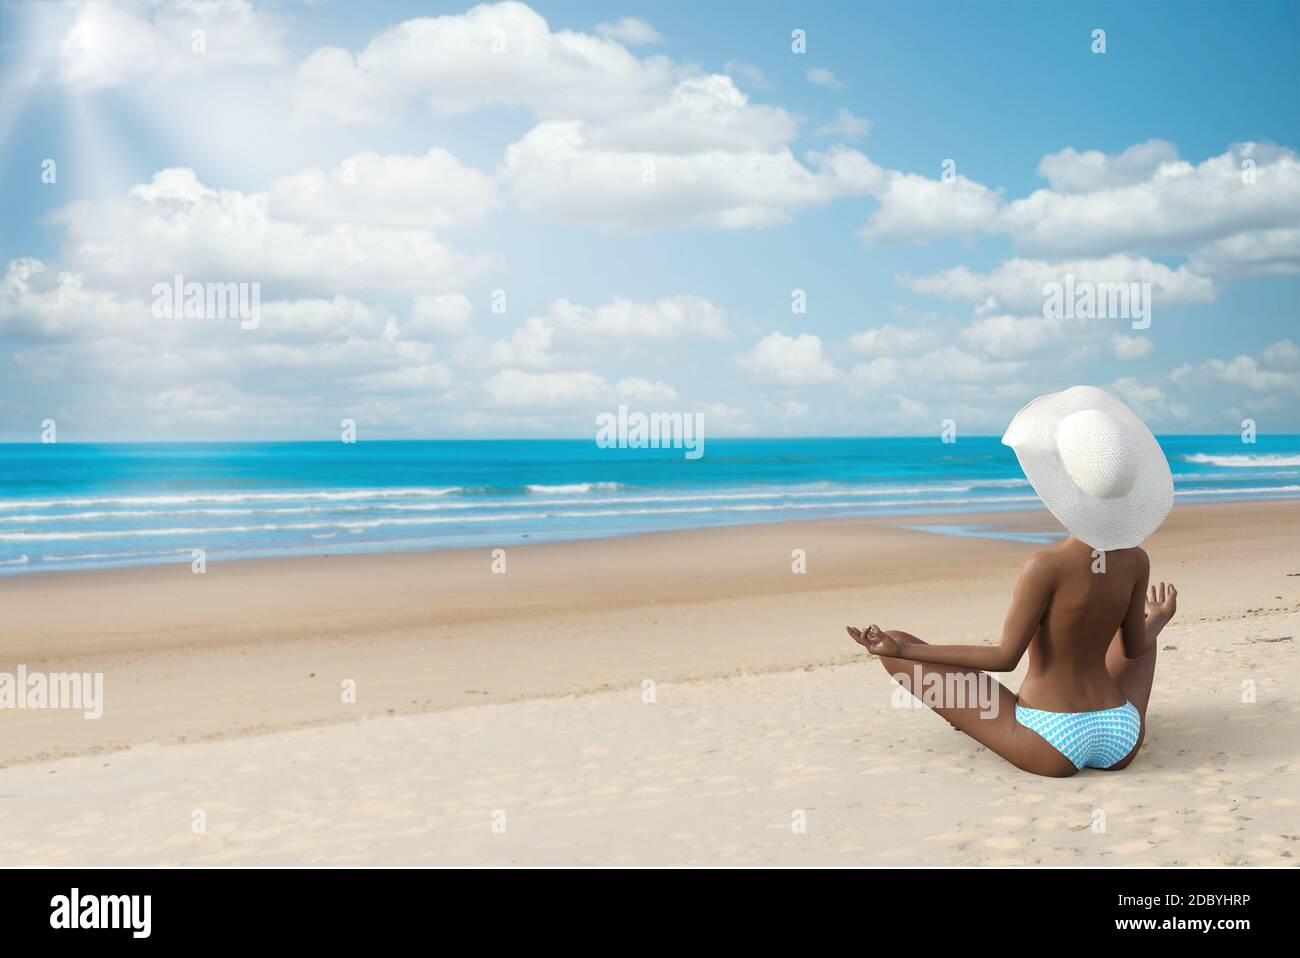 82,408 Yoga Poses Beach Images, Stock Photos, 3D objects